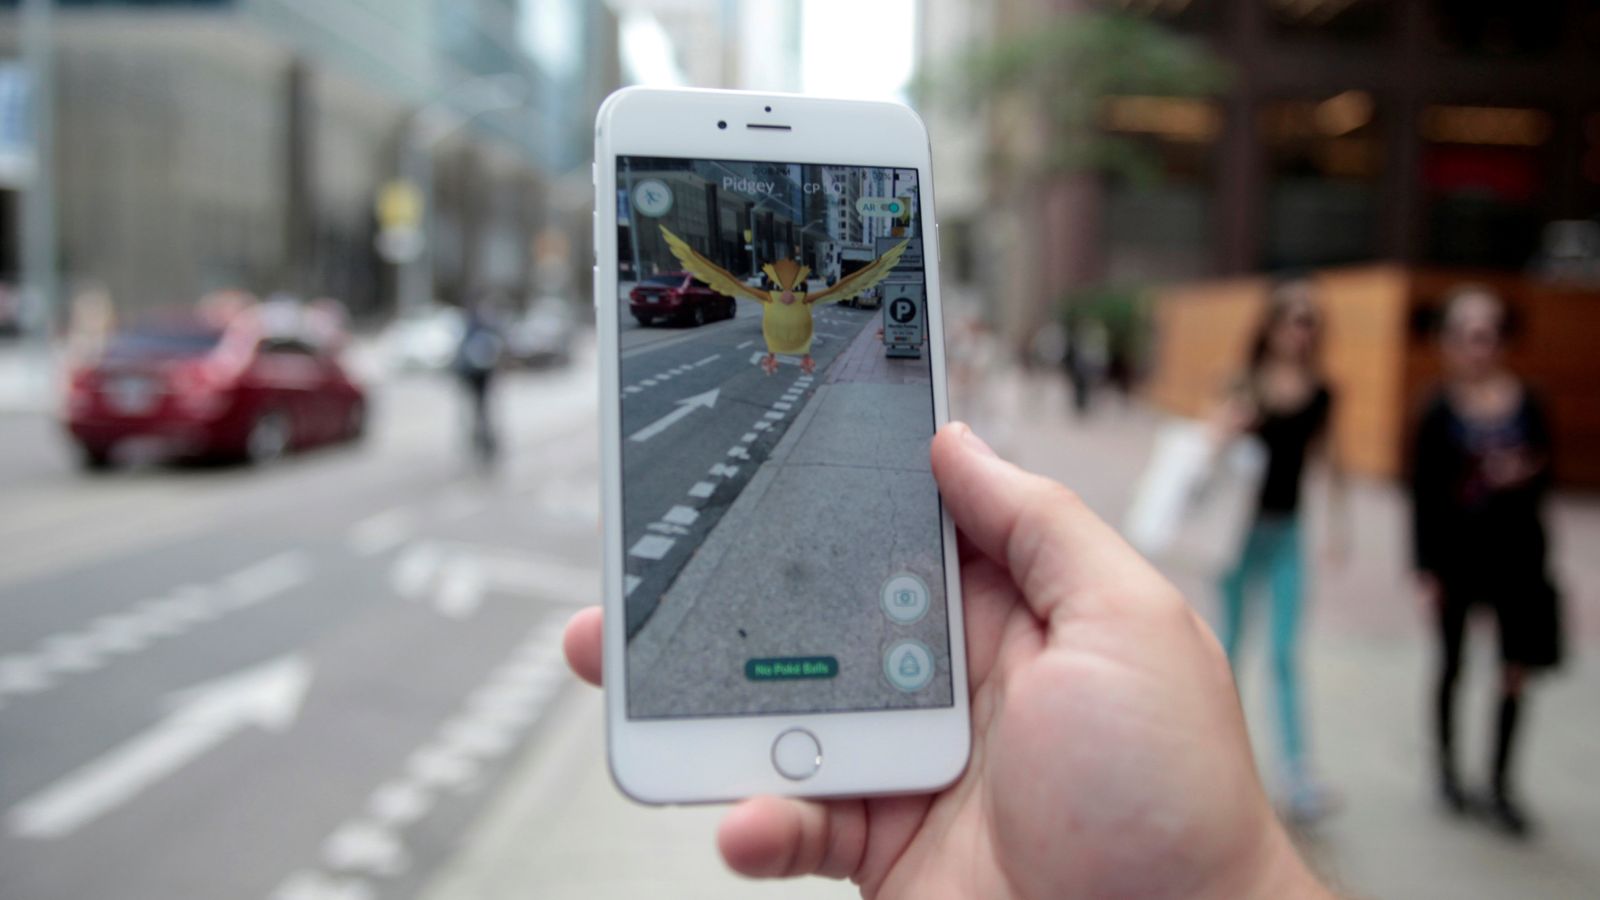 Police officers fired for ignoring LA robbery in progress to play Pokemon Go